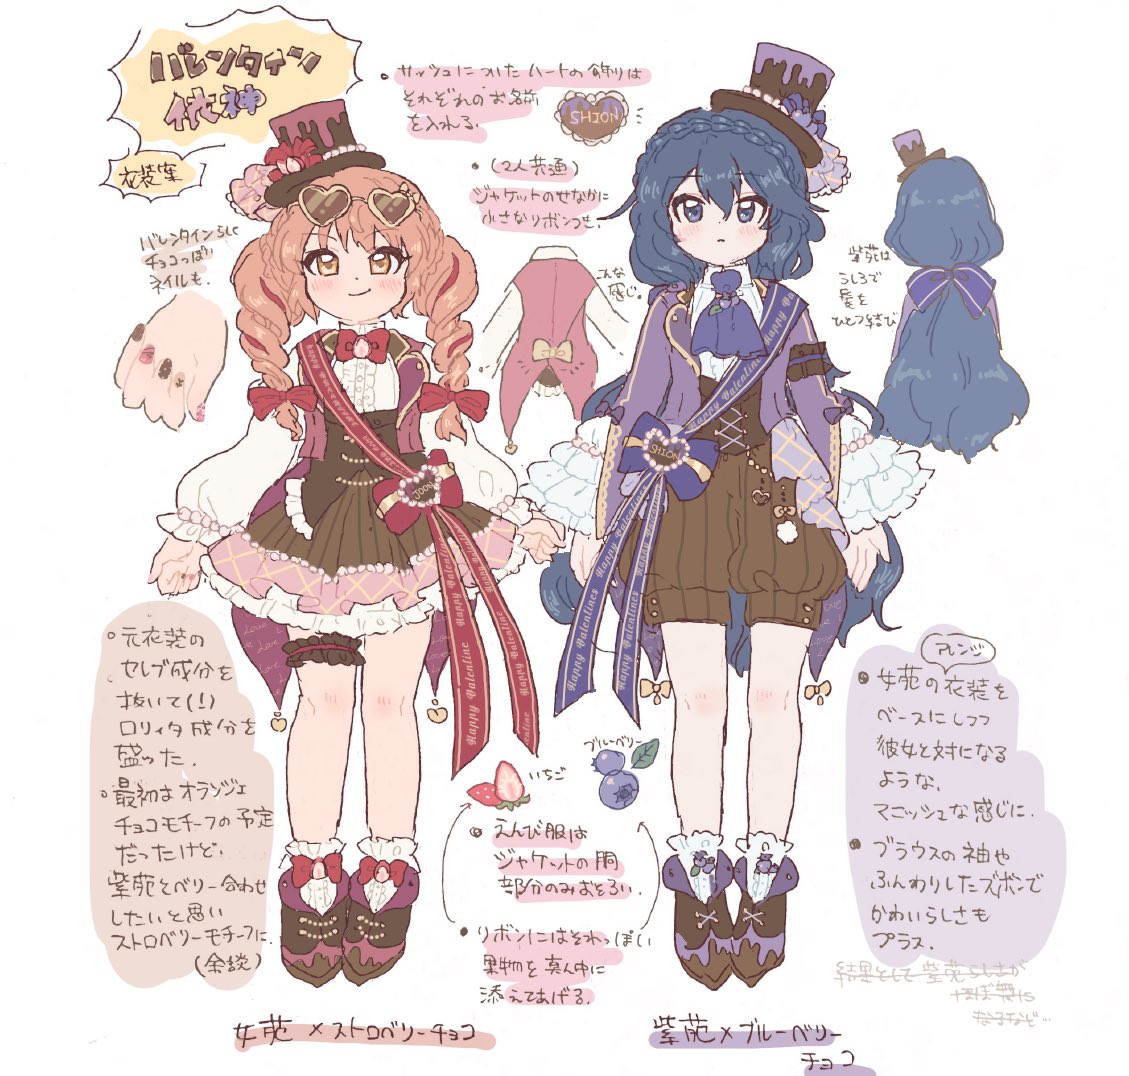 2girls alternate_costume ascot bangs blue_eyes blue_hair blue_neckwear blue_ribbon blue_sash blueberry bow bowtie braid brown_footwear brown_shorts brown_skirt brown_vest buttons cake_hat candy character_sheet chocolate clothes_writing coattails commentary_request crown_braid dot_nose eyewear_on_head food food-themed_clothes frilled_shirt frilled_skirt frilled_sleeves frills fruit full_body hair_between_eyes hair_bow hair_ribbon hat hat_bow hat_ornament heart heart-shaped_chocolate heart-shaped_eyewear jacket layered_skirt leg_garter light_blush long_hair long_sleeves looking_at_viewer matching_outfit multiple_girls pink_skirt pinstripe_shorts pinstripe_skirt purple_jacket red_bow red_jacket red_neckwear red_ribbon red_sash ribbon sakurasaka sash shirt shoes shorts skirt smile socks standing strawberry text_focus top_hat touhou translation_request two-tone_skirt very_long_hair vest white_legwear white_shirt wide_sleeves yorigami_jo'on yorigami_shion